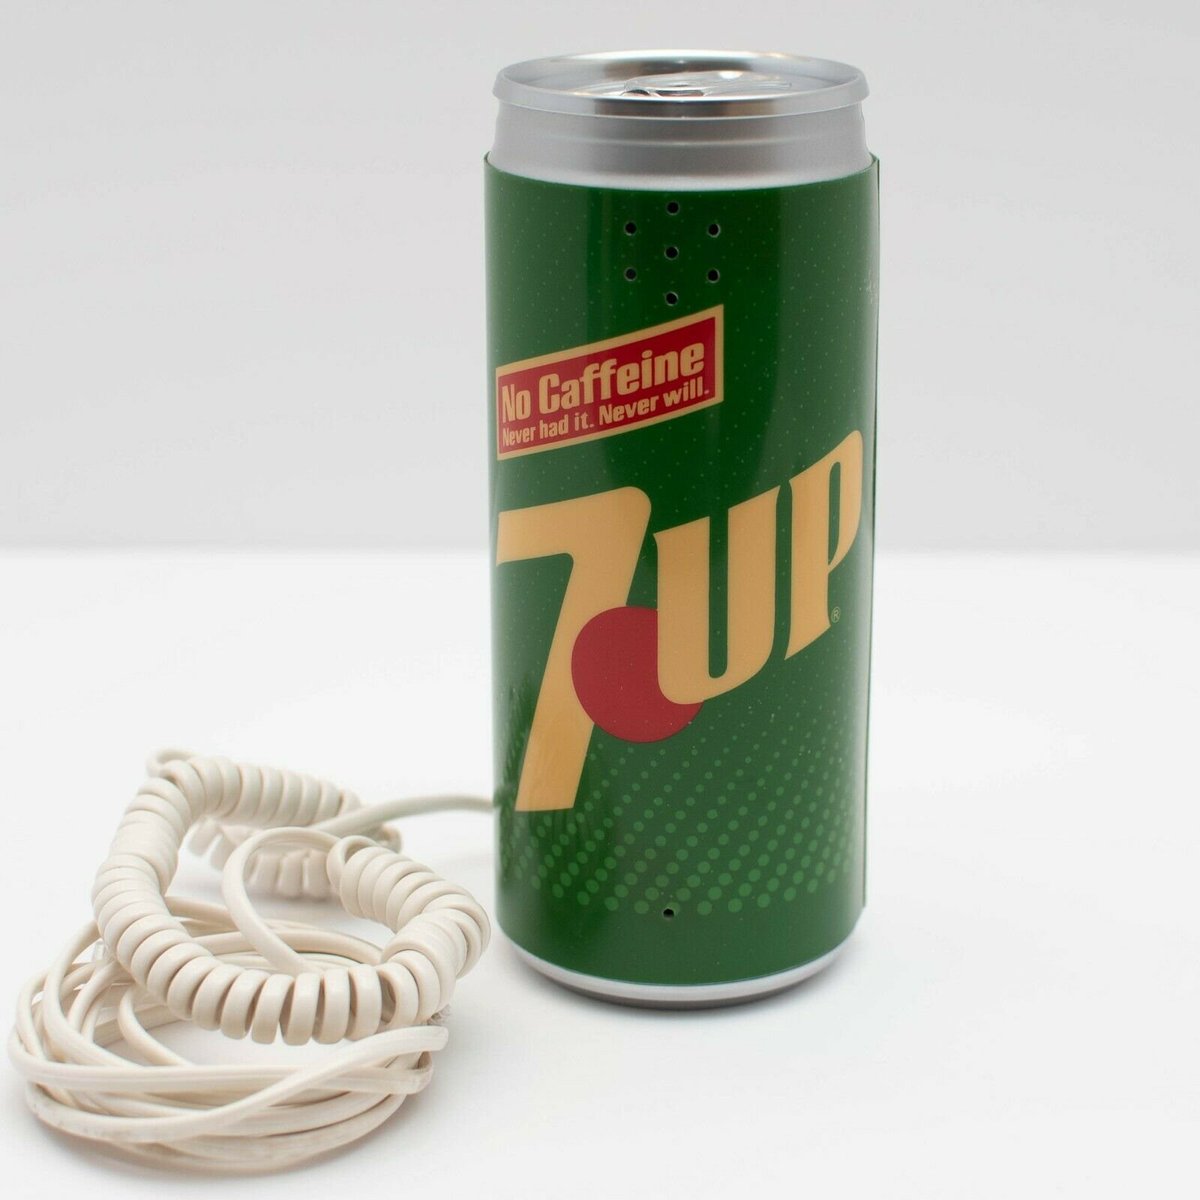 7up: it's a phone in a can!